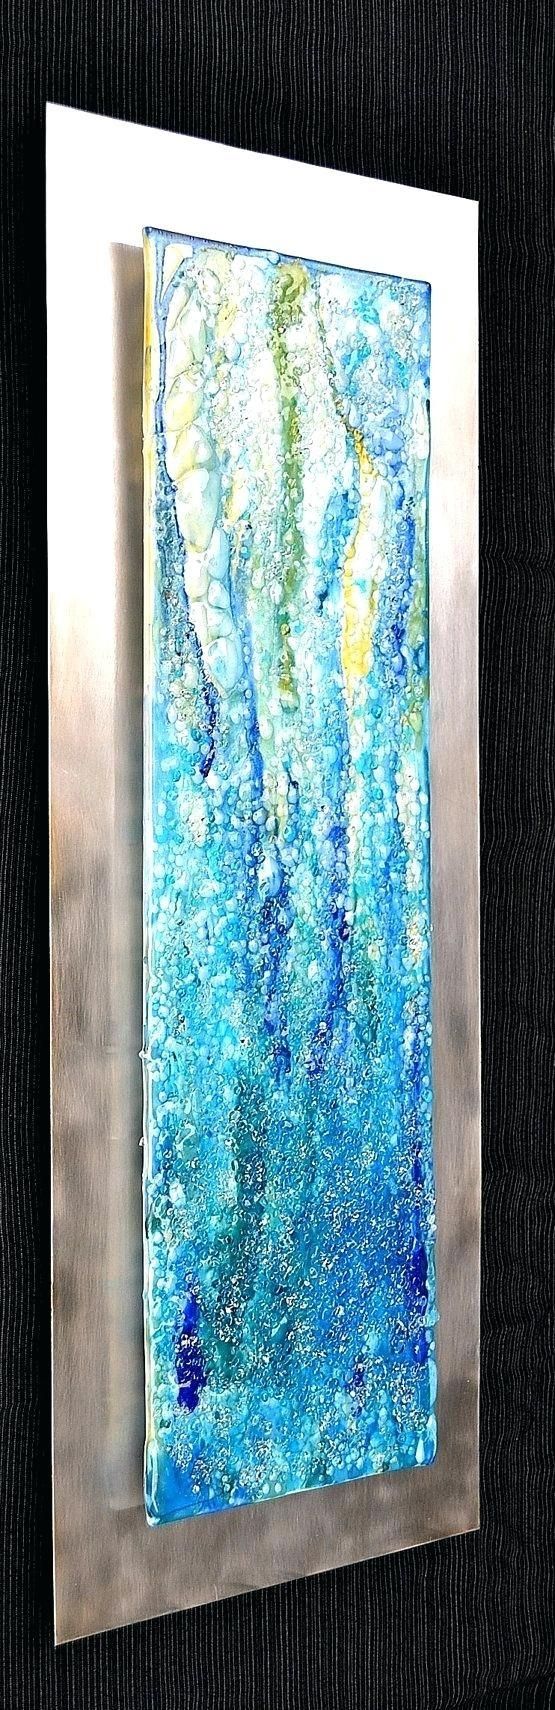 Wall Ideas : Turquoise Bloom Metal Wall Art Turquoise Metal Flower Inside Brown And Turquoise Wall Art (View 9 of 20)